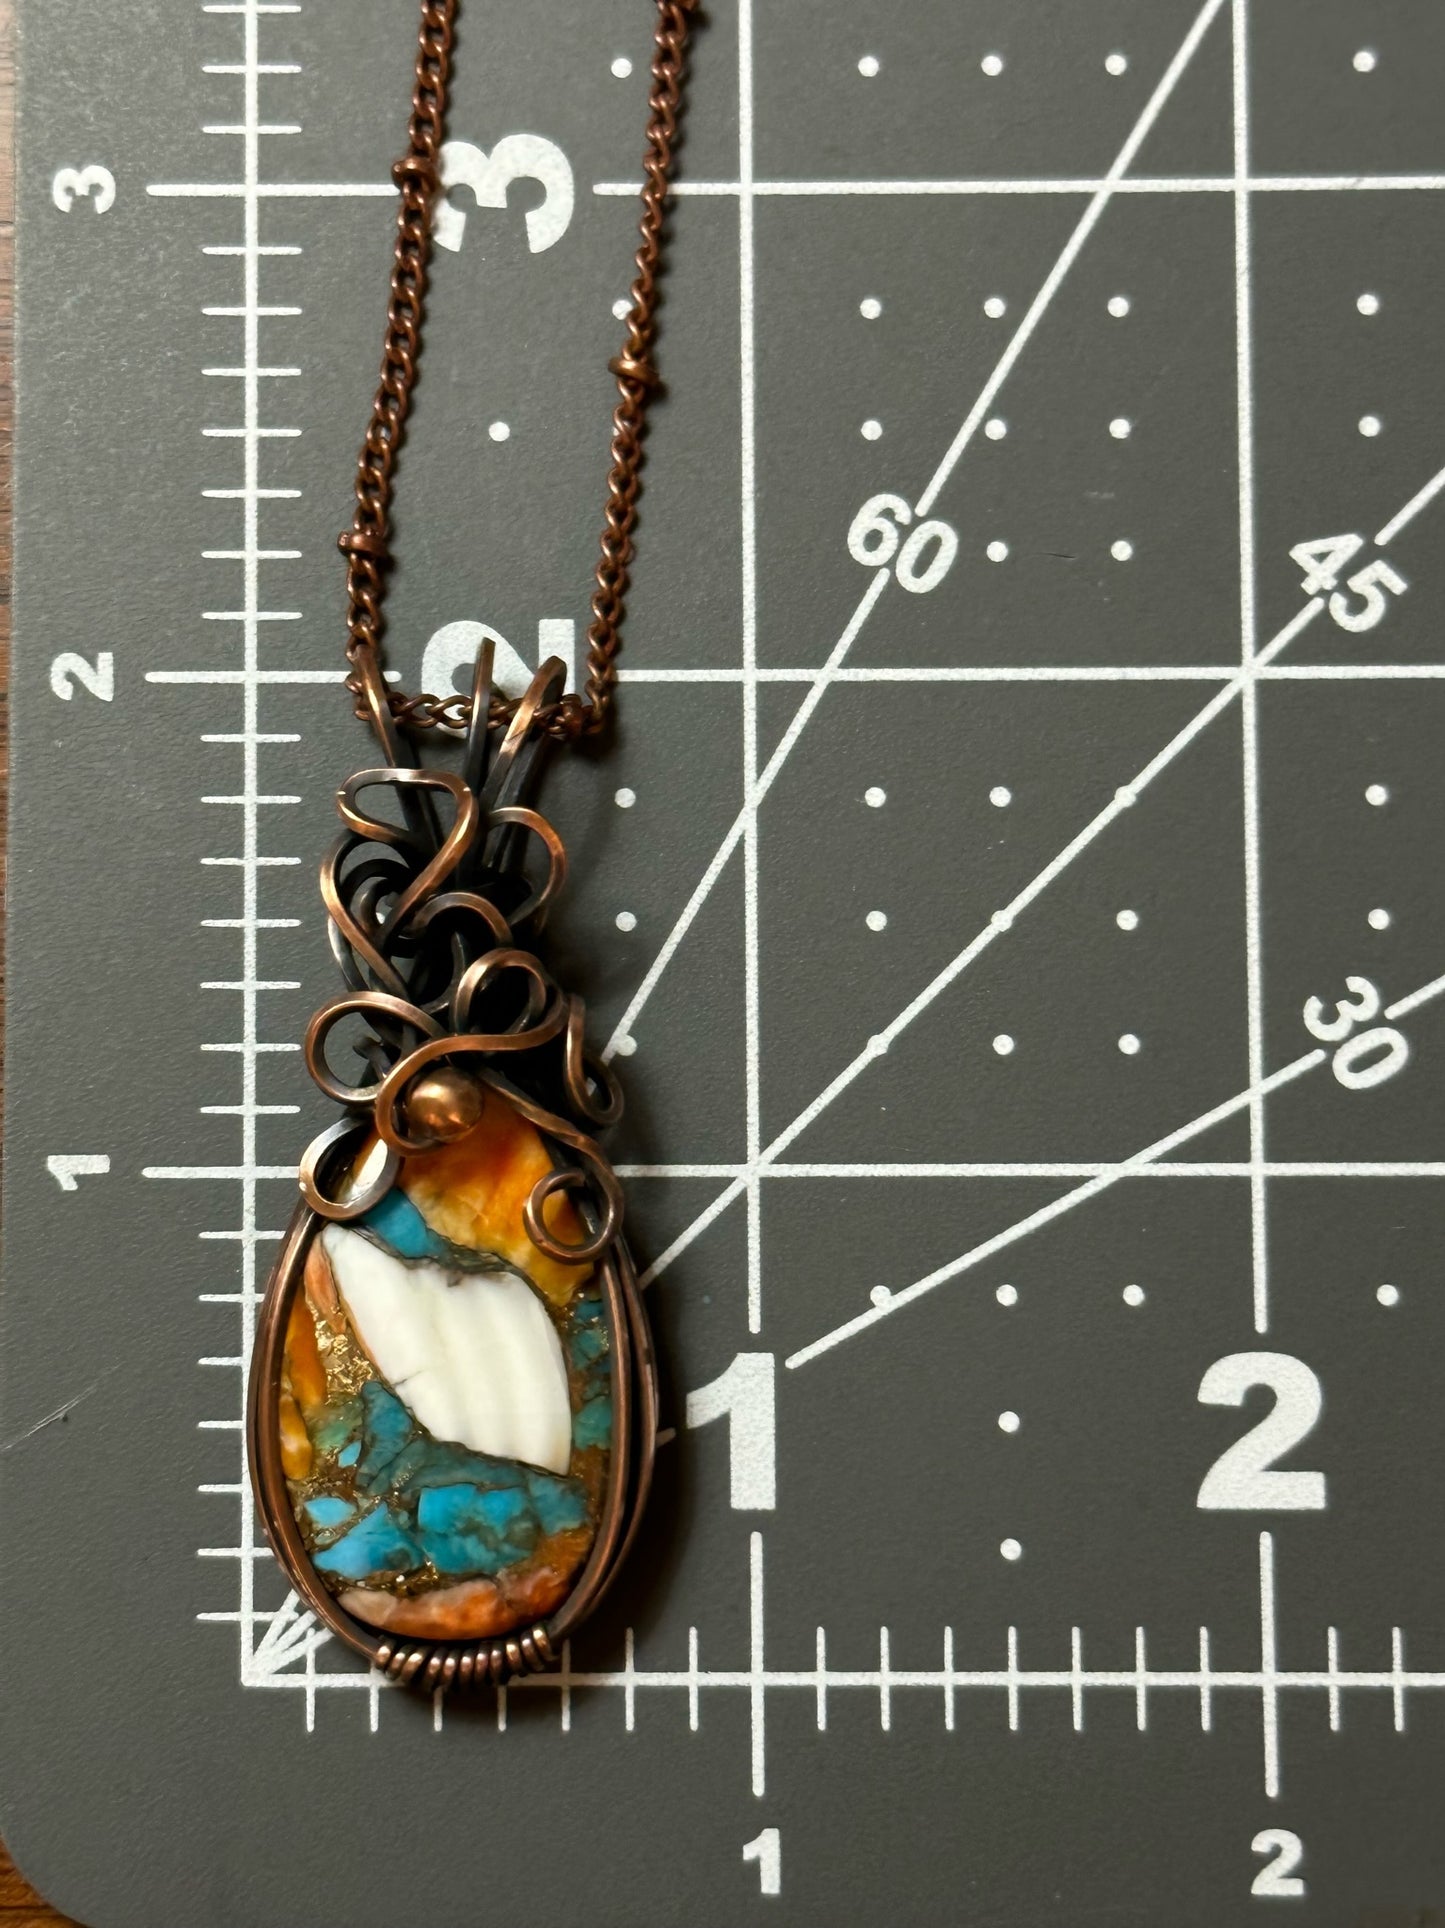 Vibrant Copper Turquoise Mohave Teardrop Handmade Wire Wrapped Pendant